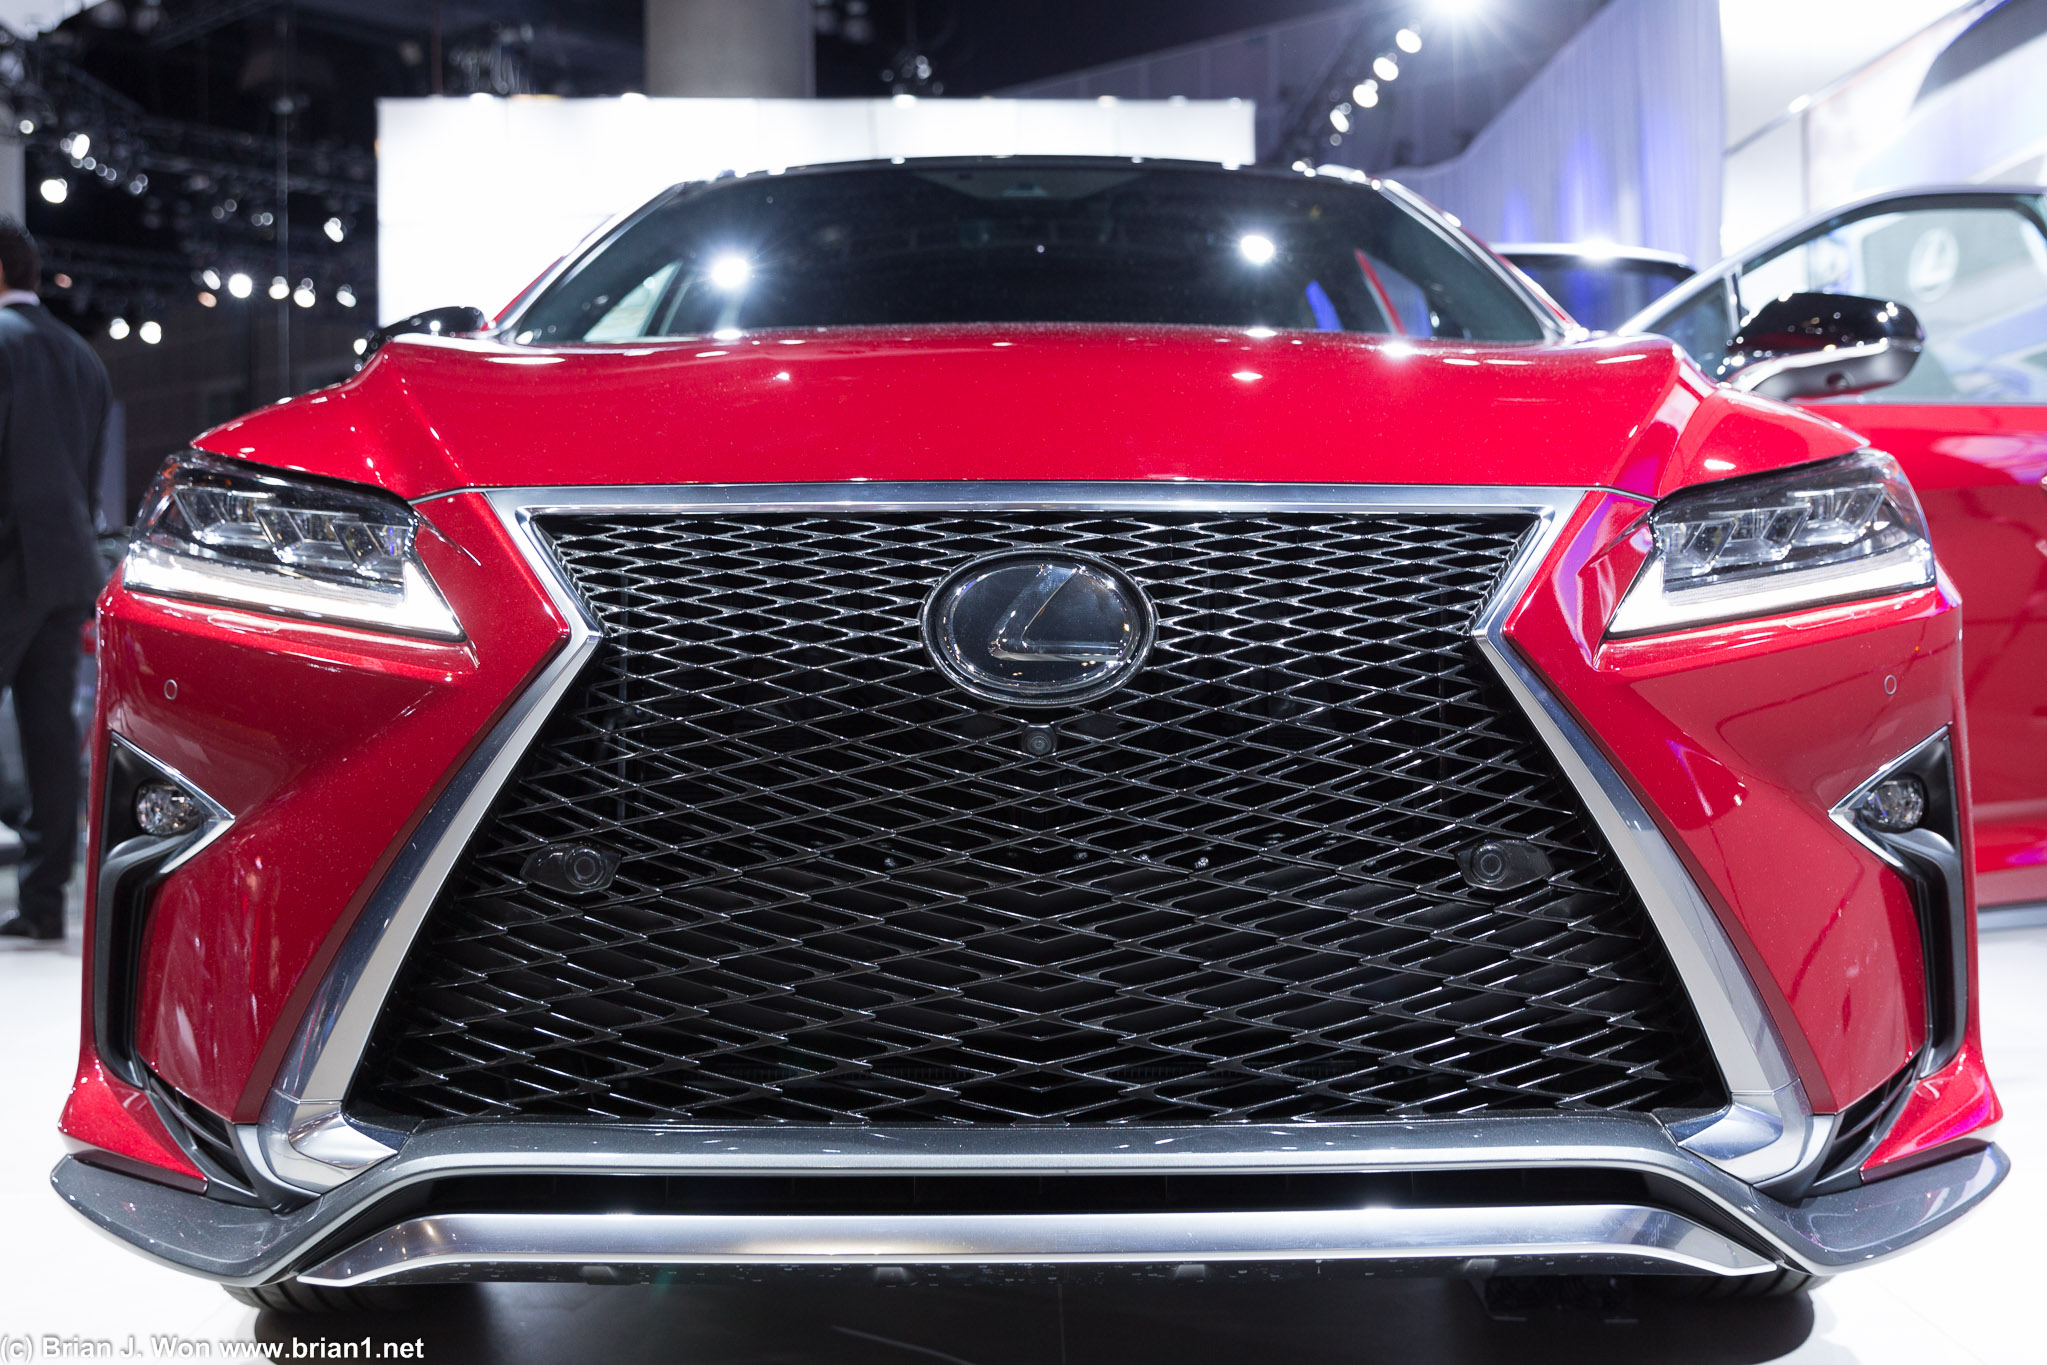 The Lexus spindle grill, like Audi's, could swallow small children.